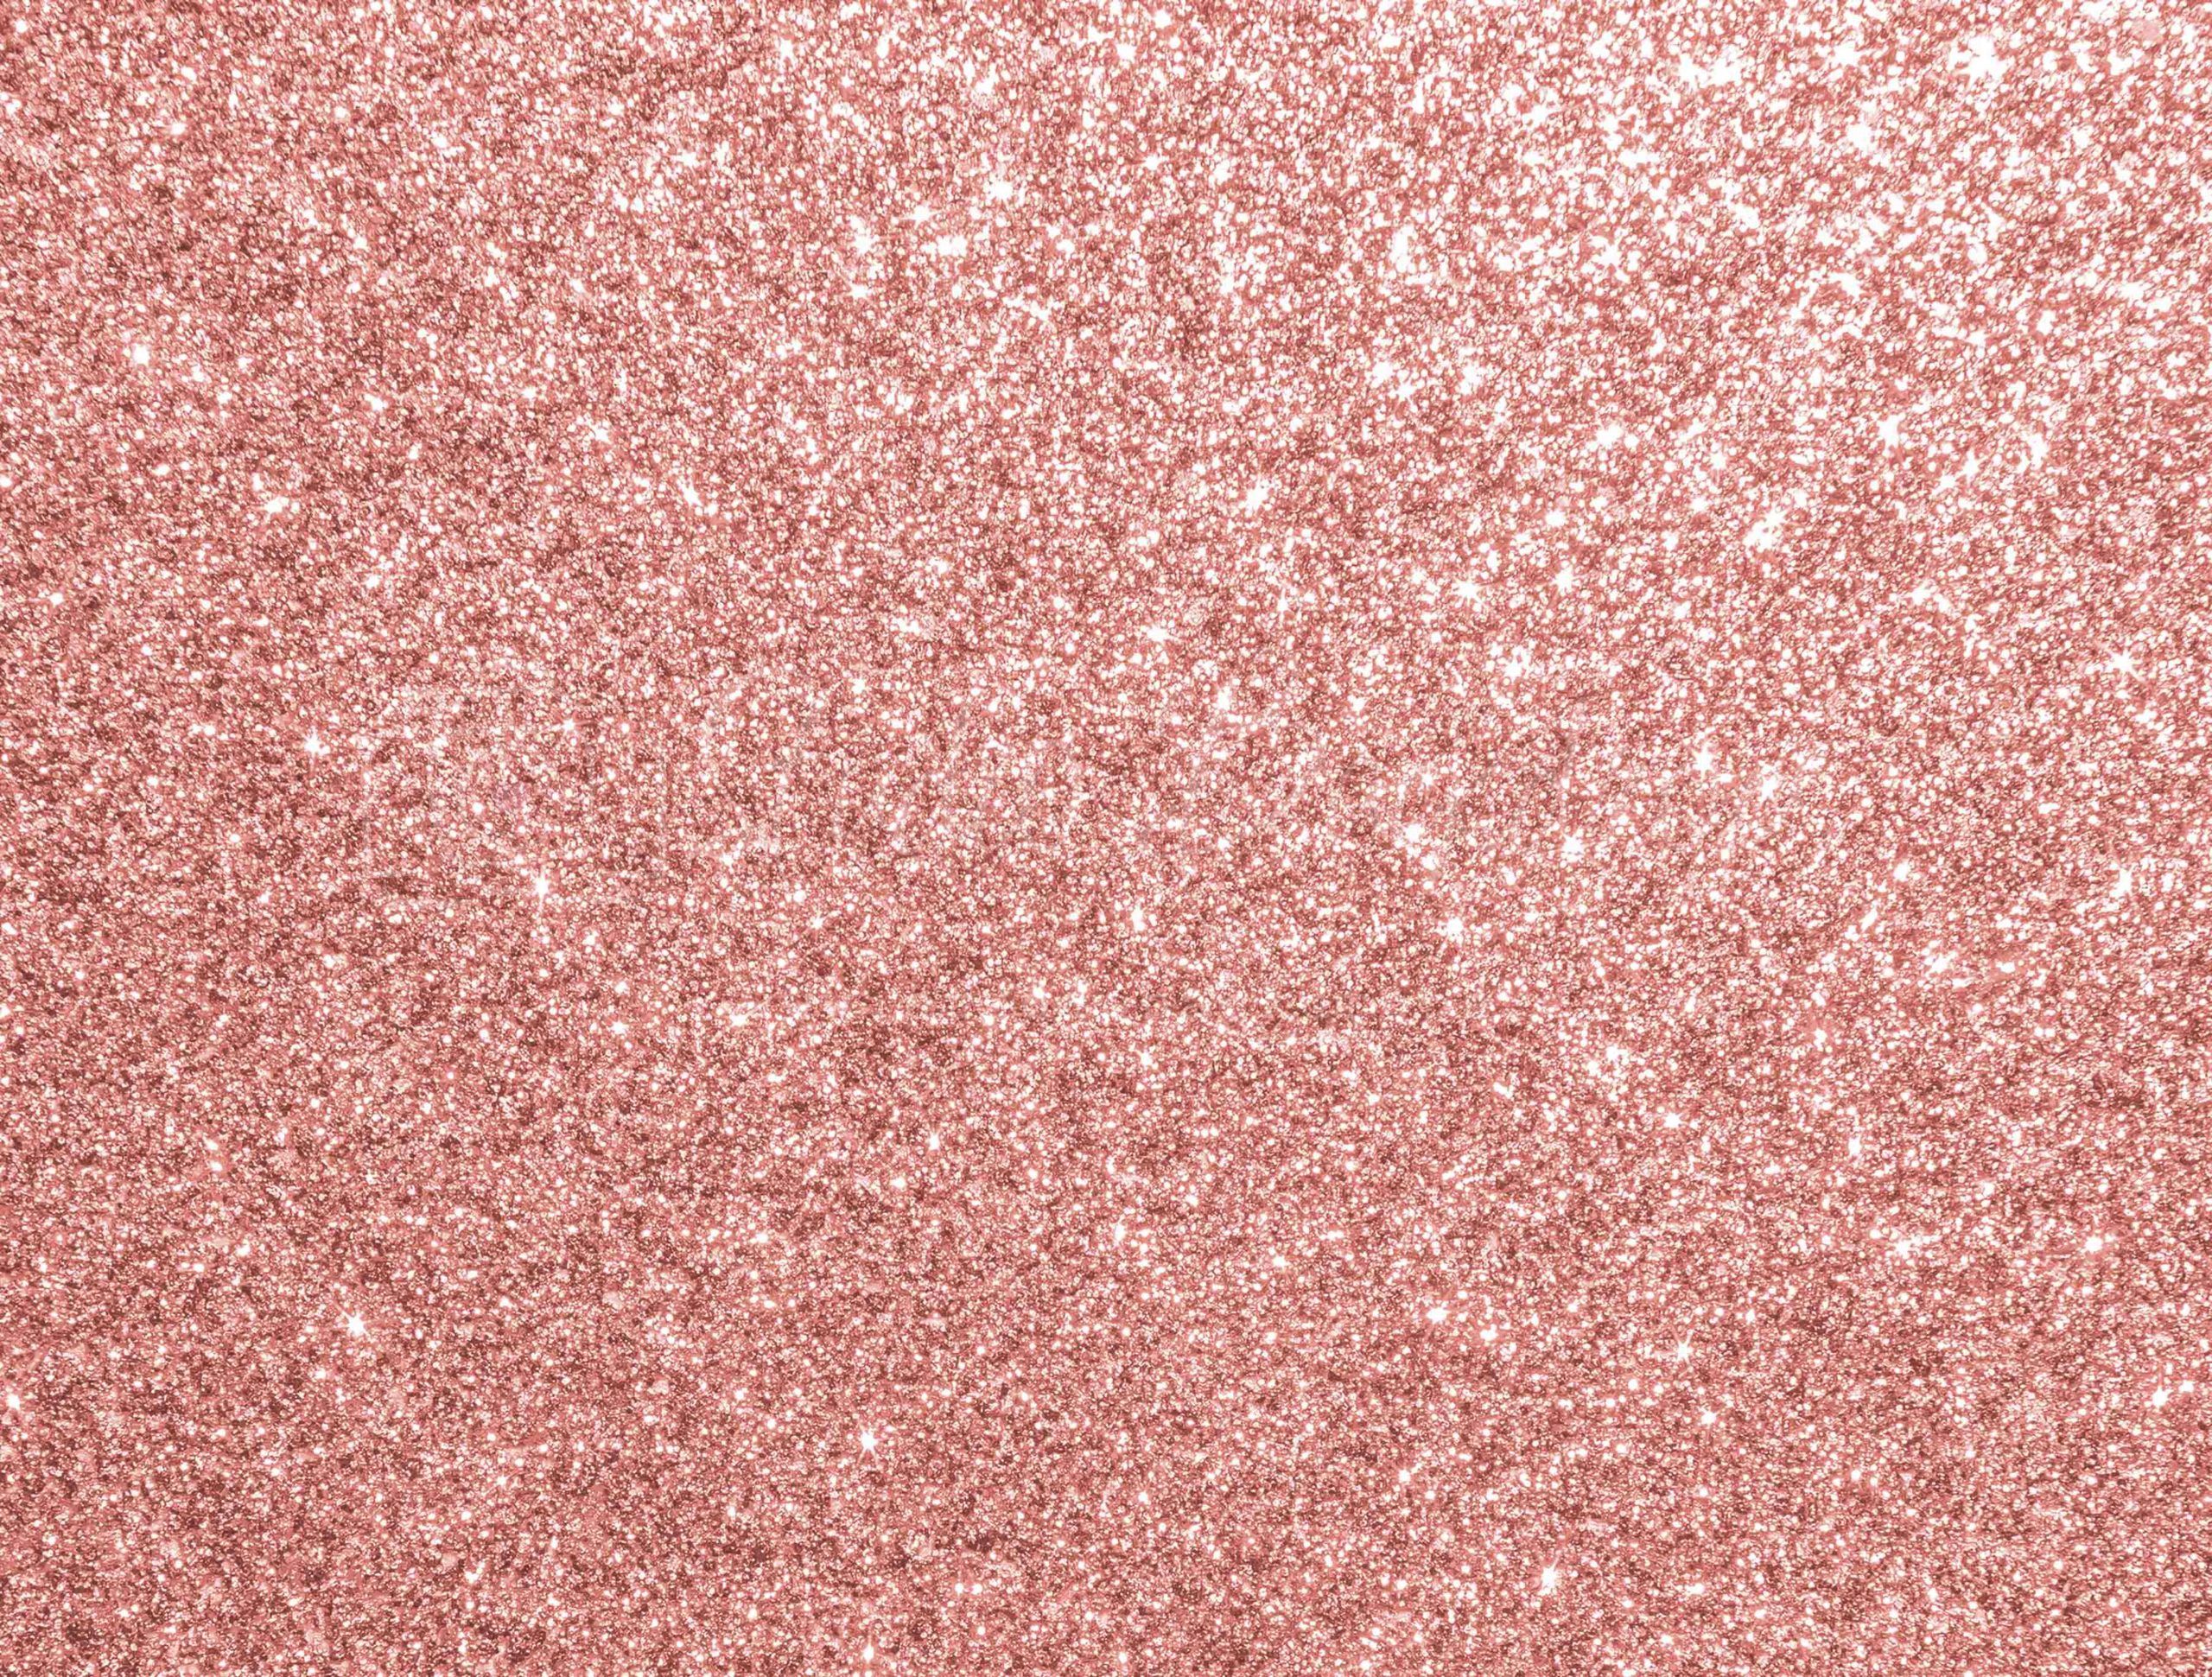 rose gold sparkle wallpaper iphone